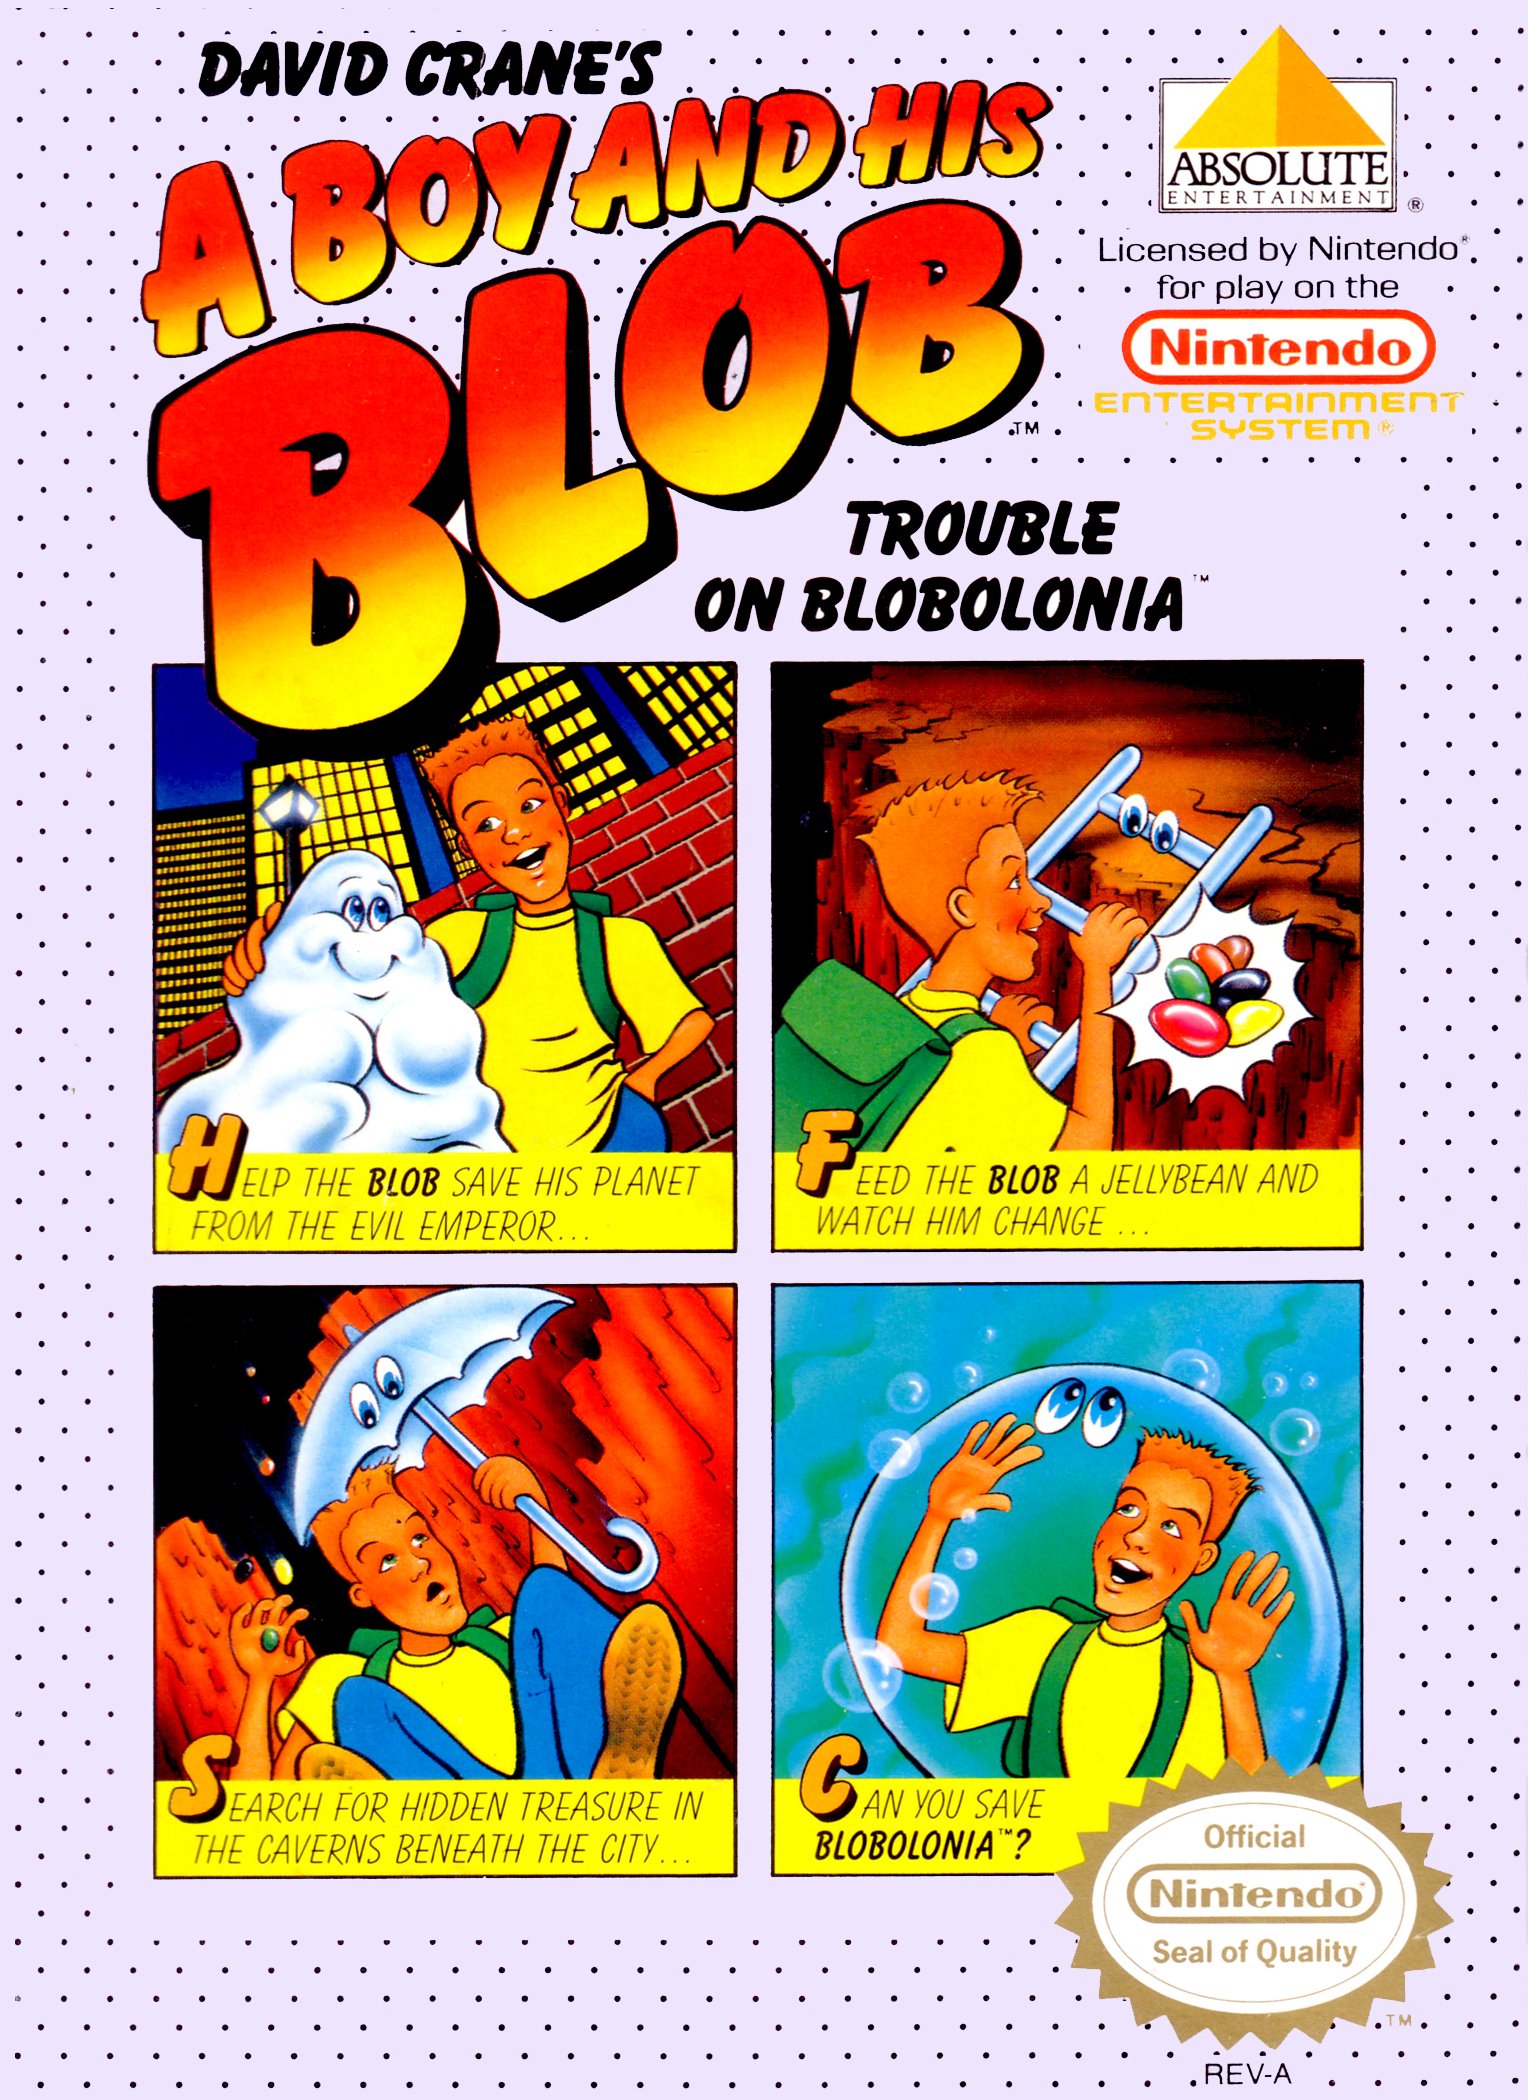 Image of A Boy and His Blob: Trouble on Blobolonia